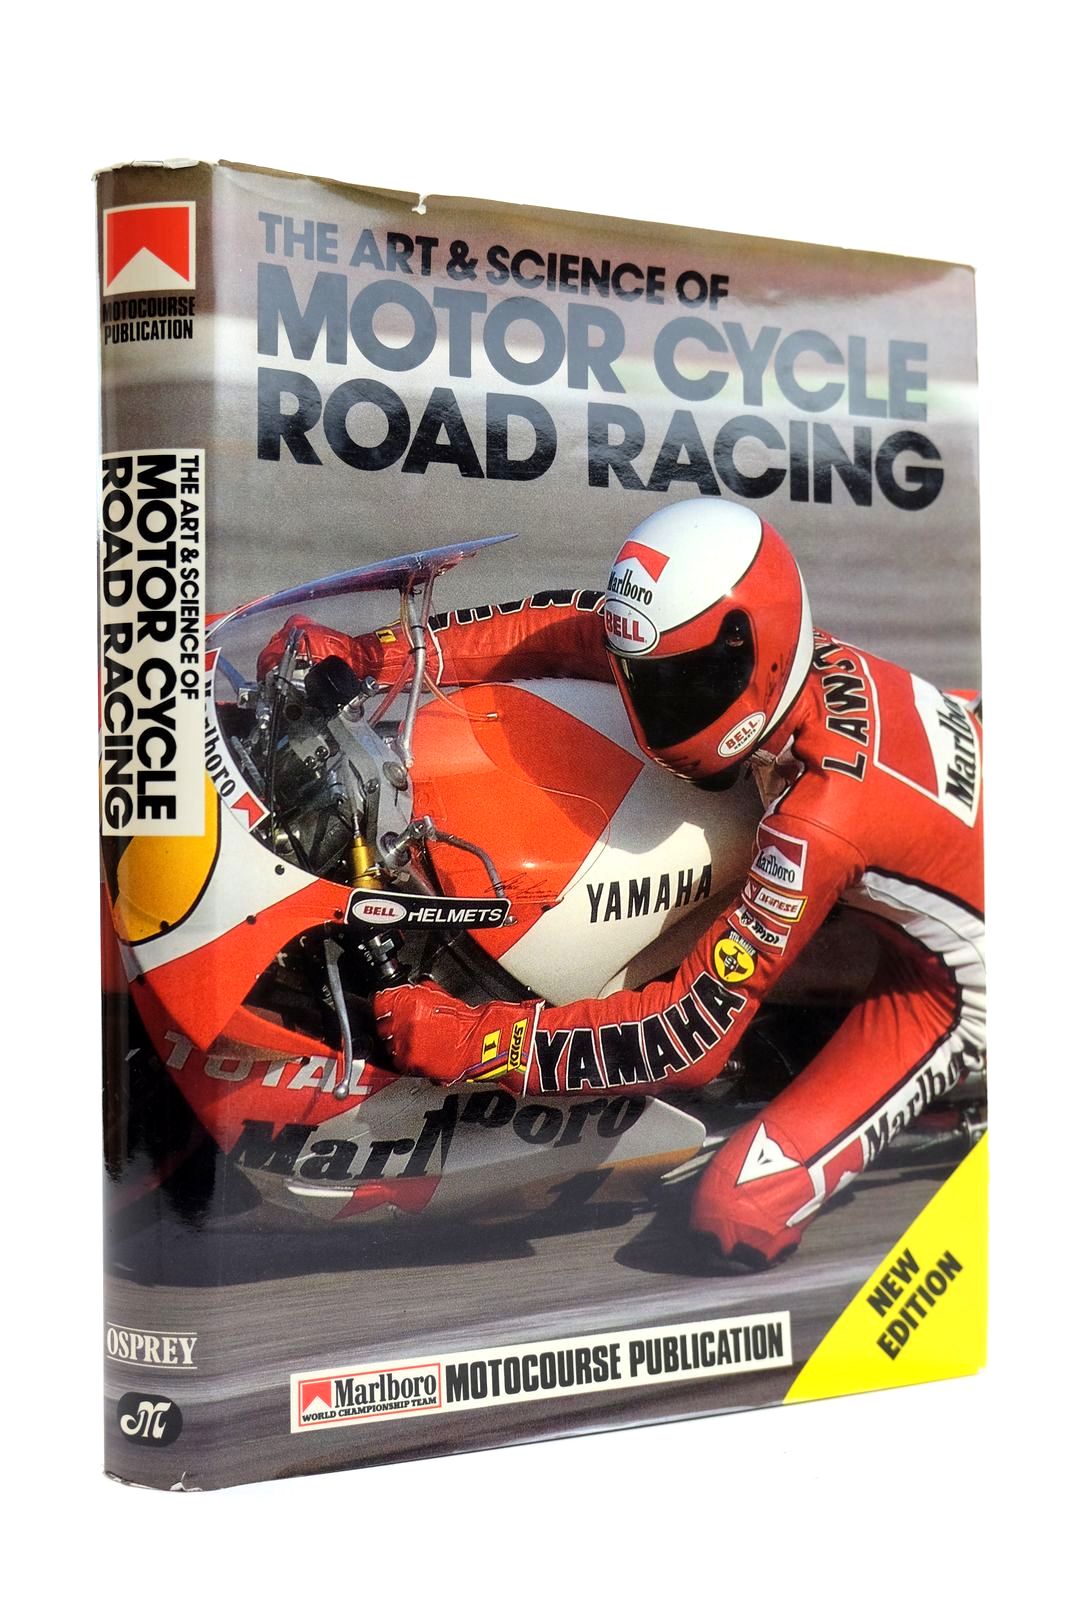 Photo of THE ART AND SCIENCE OF MOTOR CYCLE ROAD RACING written by Clifford, Peter published by Hazleton Publishing (STOCK CODE: 2131875)  for sale by Stella & Rose's Books